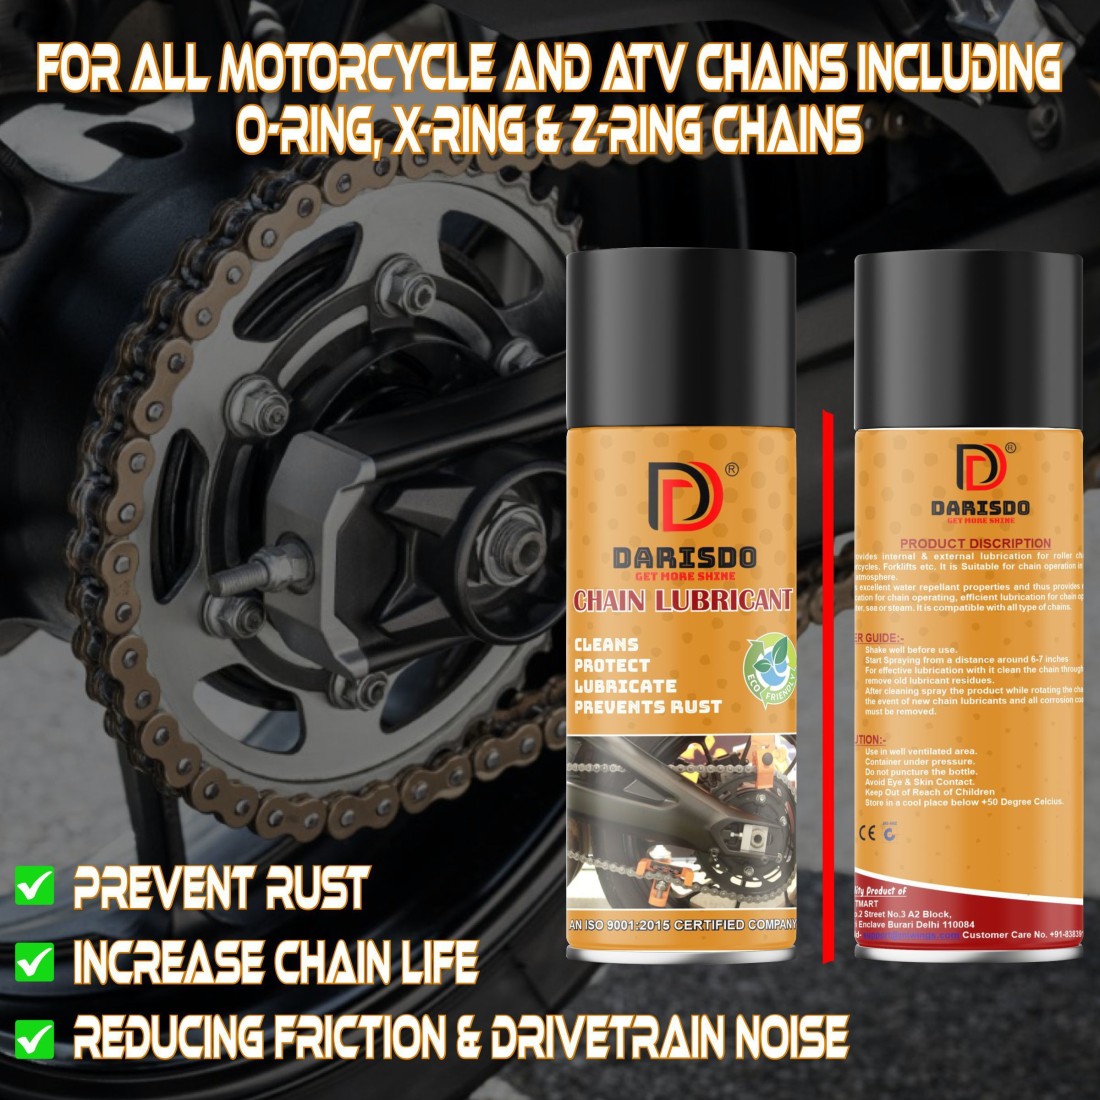 ASRYD Chain Lubricant Synthetic+Chain Cleaner With Brush Motorcycle chain  Lube+Cleaner Quality Assured (Pack of 2) 300ml Chain Oil Price in India -  Buy ASRYD Chain Lubricant Synthetic+Chain Cleaner With Brush Motorcycle  chain